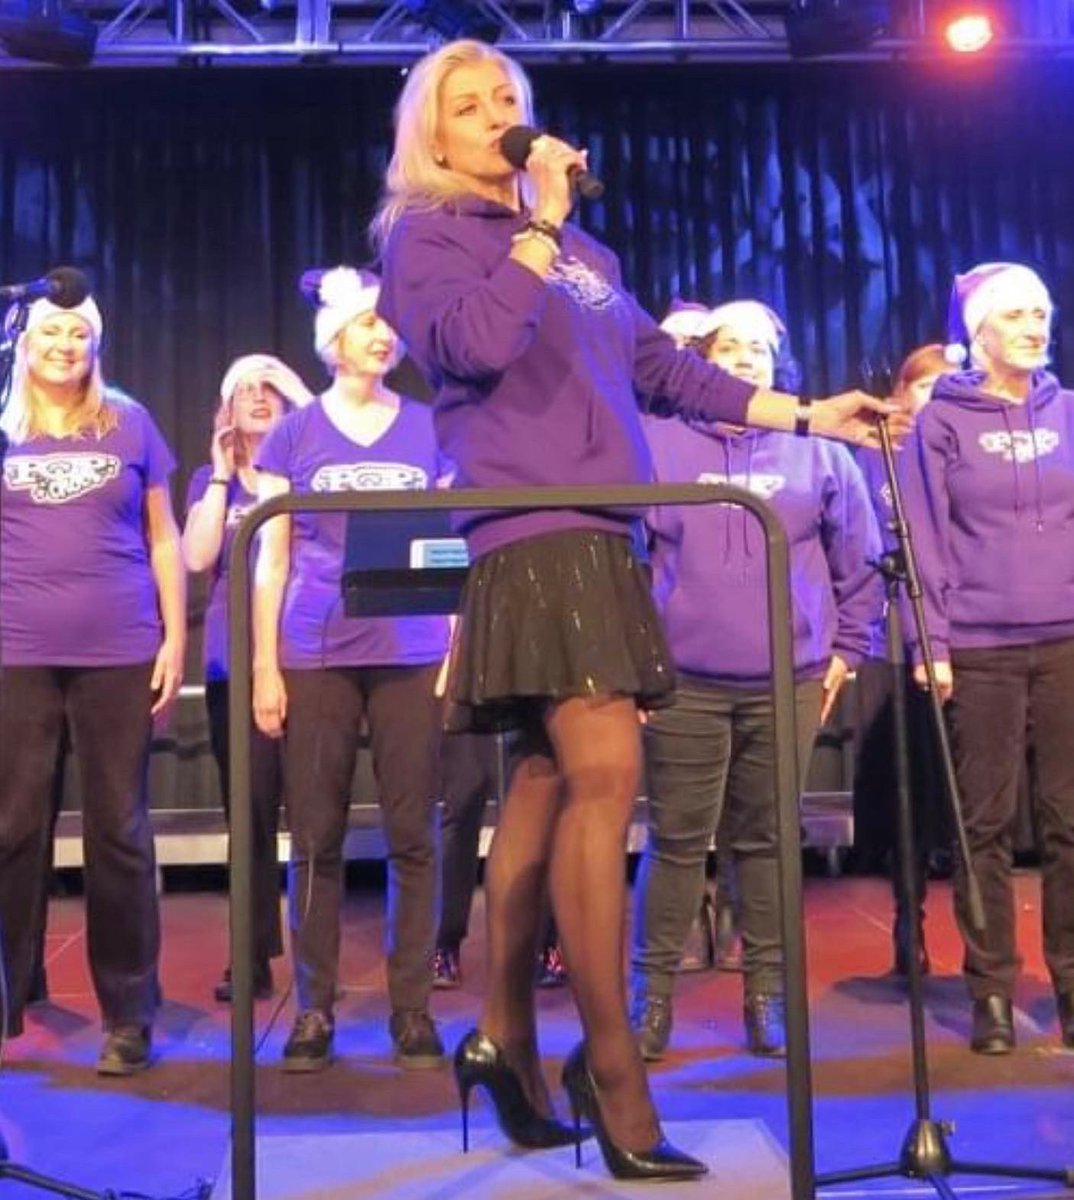 Looking forward to our performance at the Winter Choirs day in the #RFH @southbankcentre . Come and see us in the #CloreBallroom at 5.00pm. for some festive Christmas songs! #Purplechoir #popchoir #choir #Christmas2023 #freeconcert #Londonlife